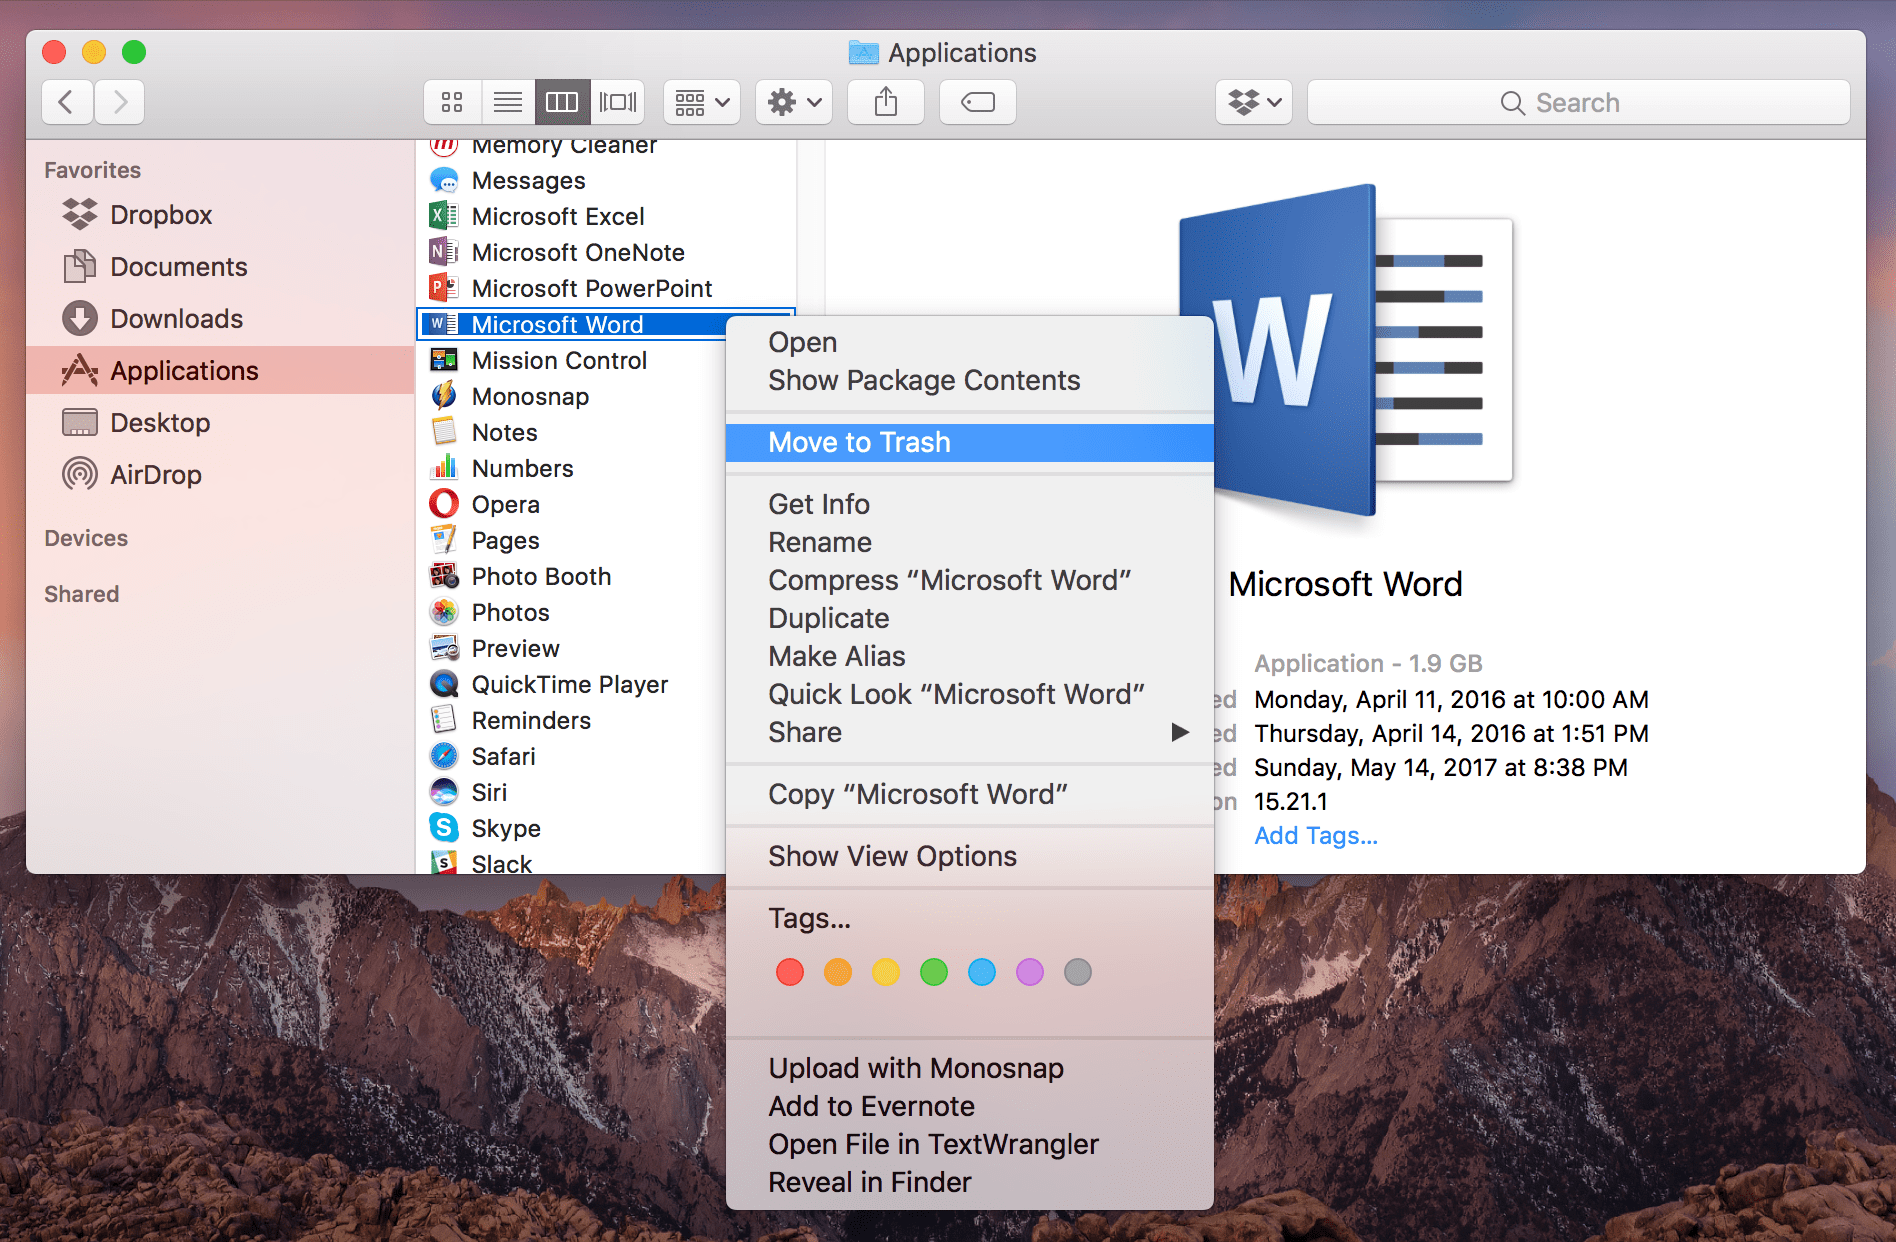 duplicate documentrs in word for mac